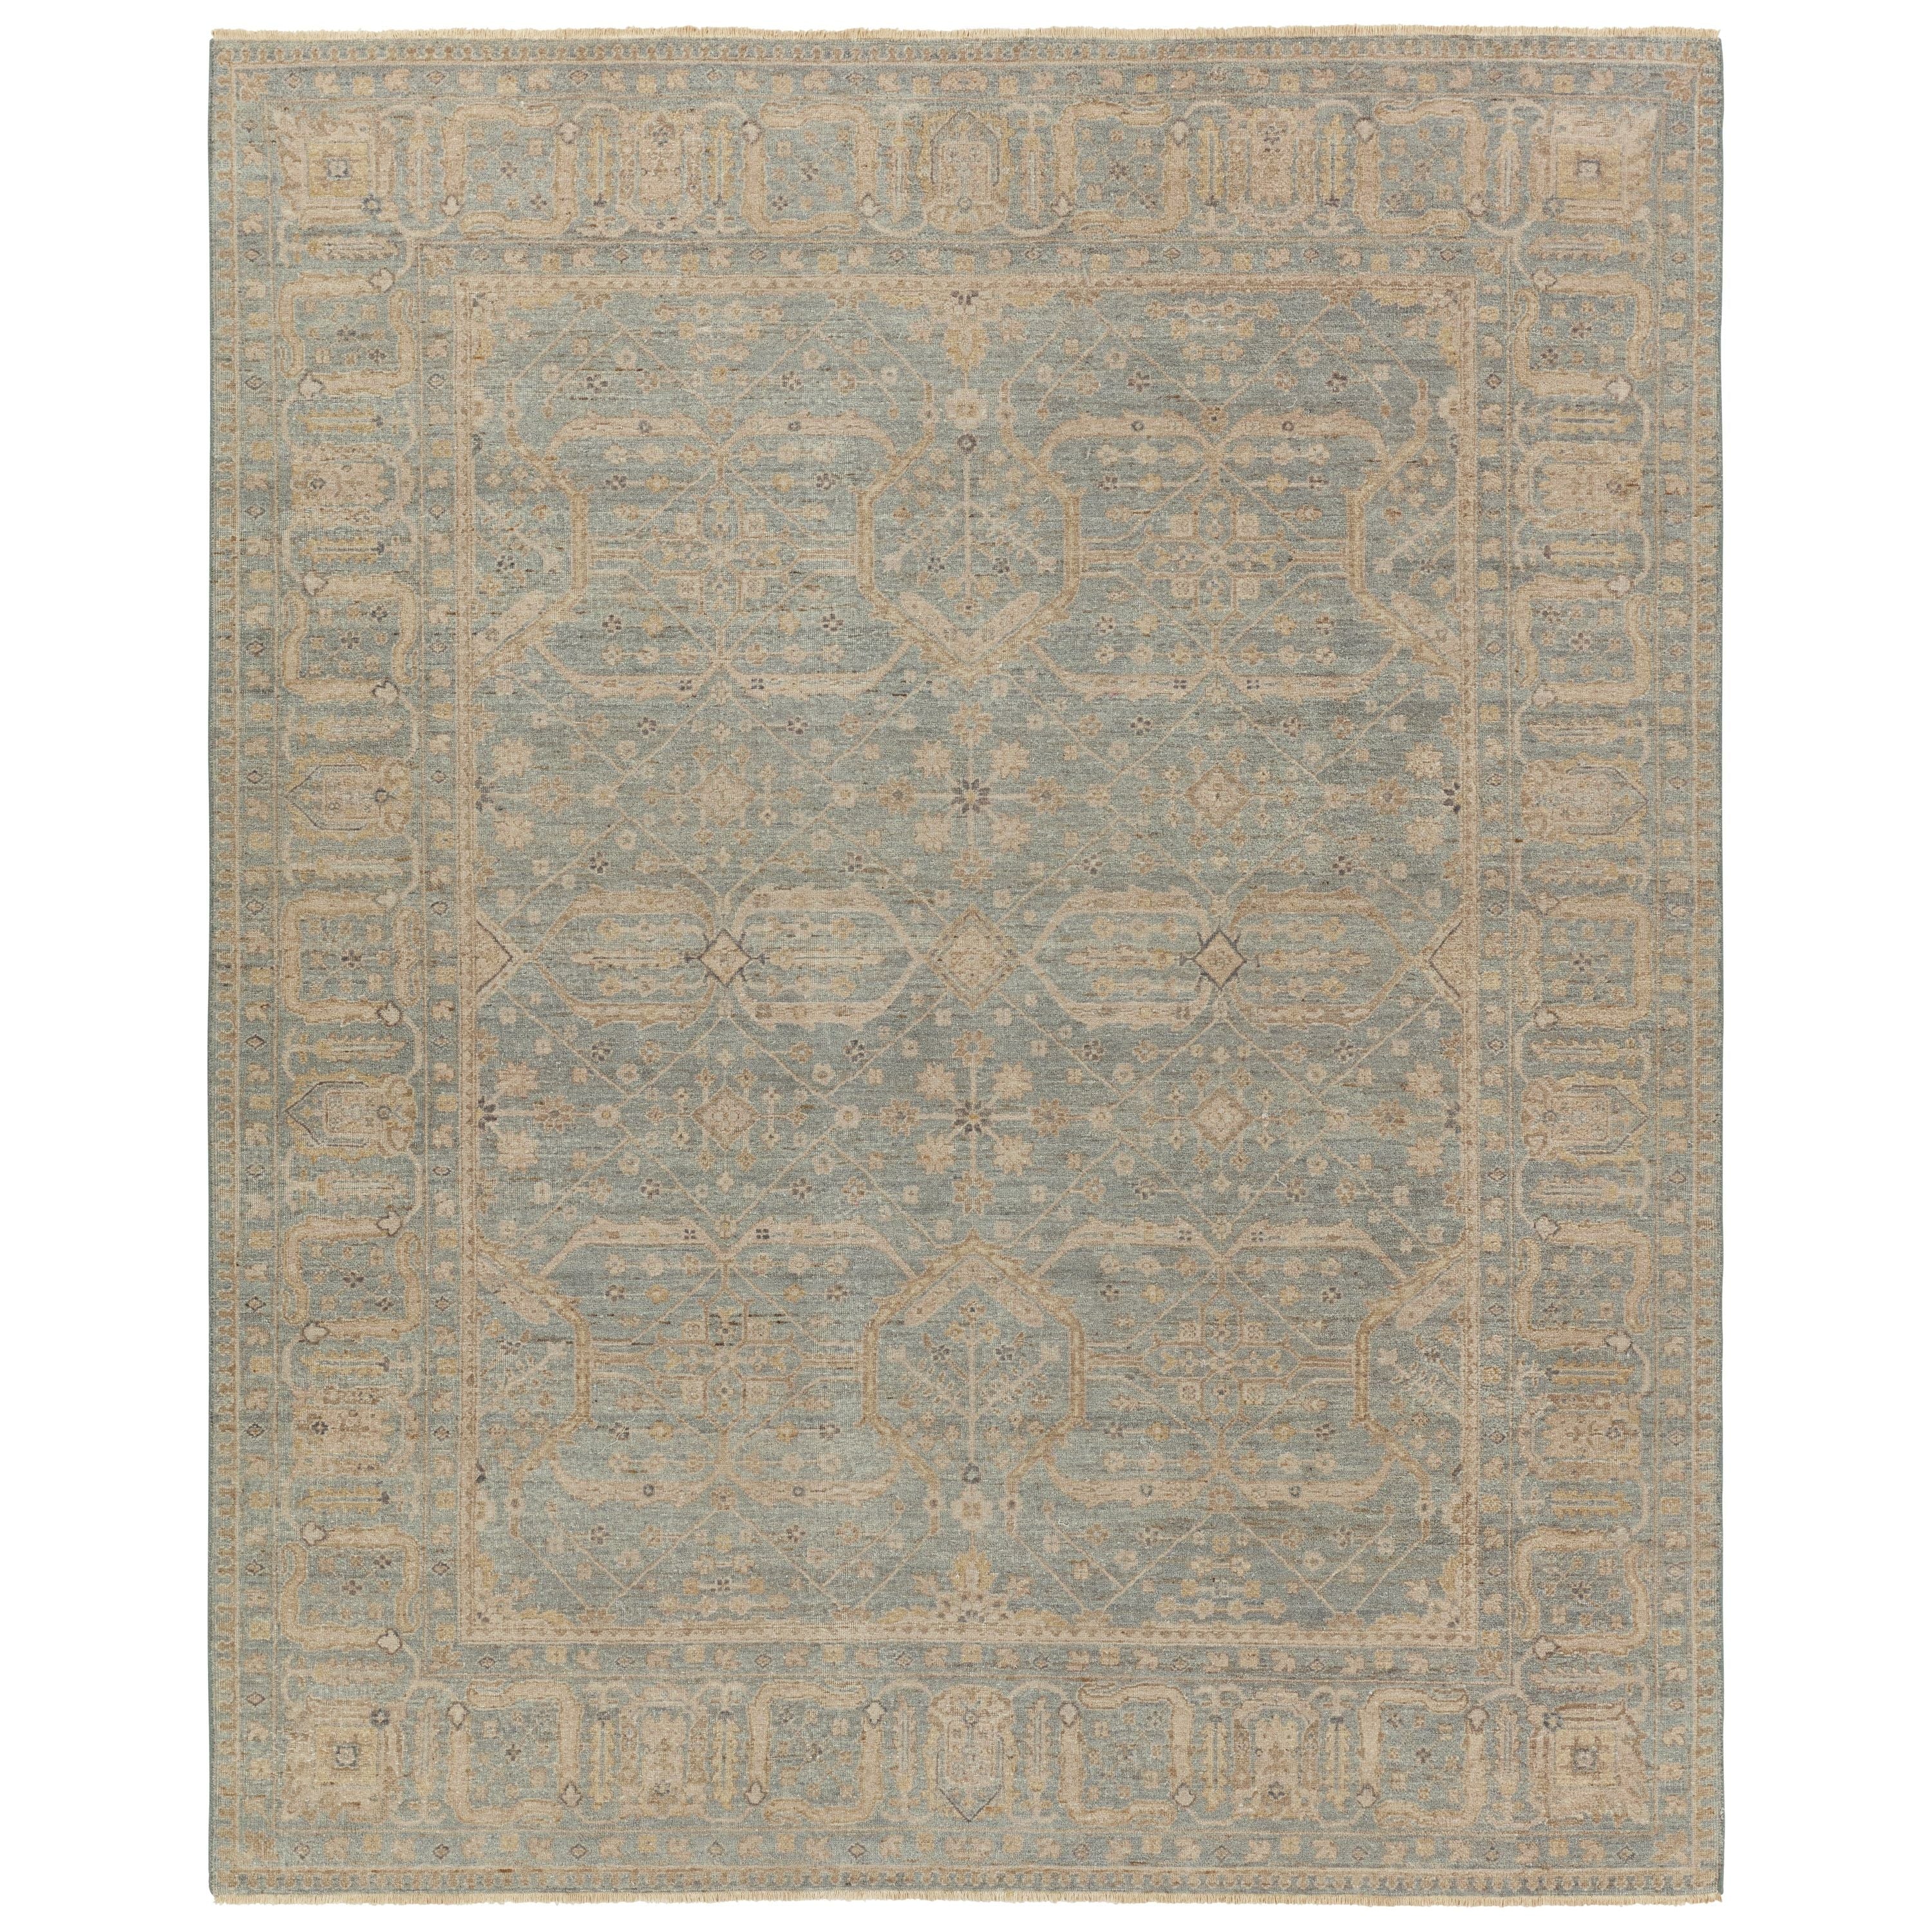 The vintage-inspired Tierzah collection features an antiqued wash and intricate traditional designs. The Maison wool rug boasts a Persian knot construction and tonal gray, tan, muted gold, and gray that grounds any space. This artisan-made rug features fringe trimmed details for a touch of global charm that pair perfectly with the intricate, floral trellis and border pattern. Amethyst Home provides interior design, new construction, custom furniture, and area rugs in the Salt Lake City metro area.